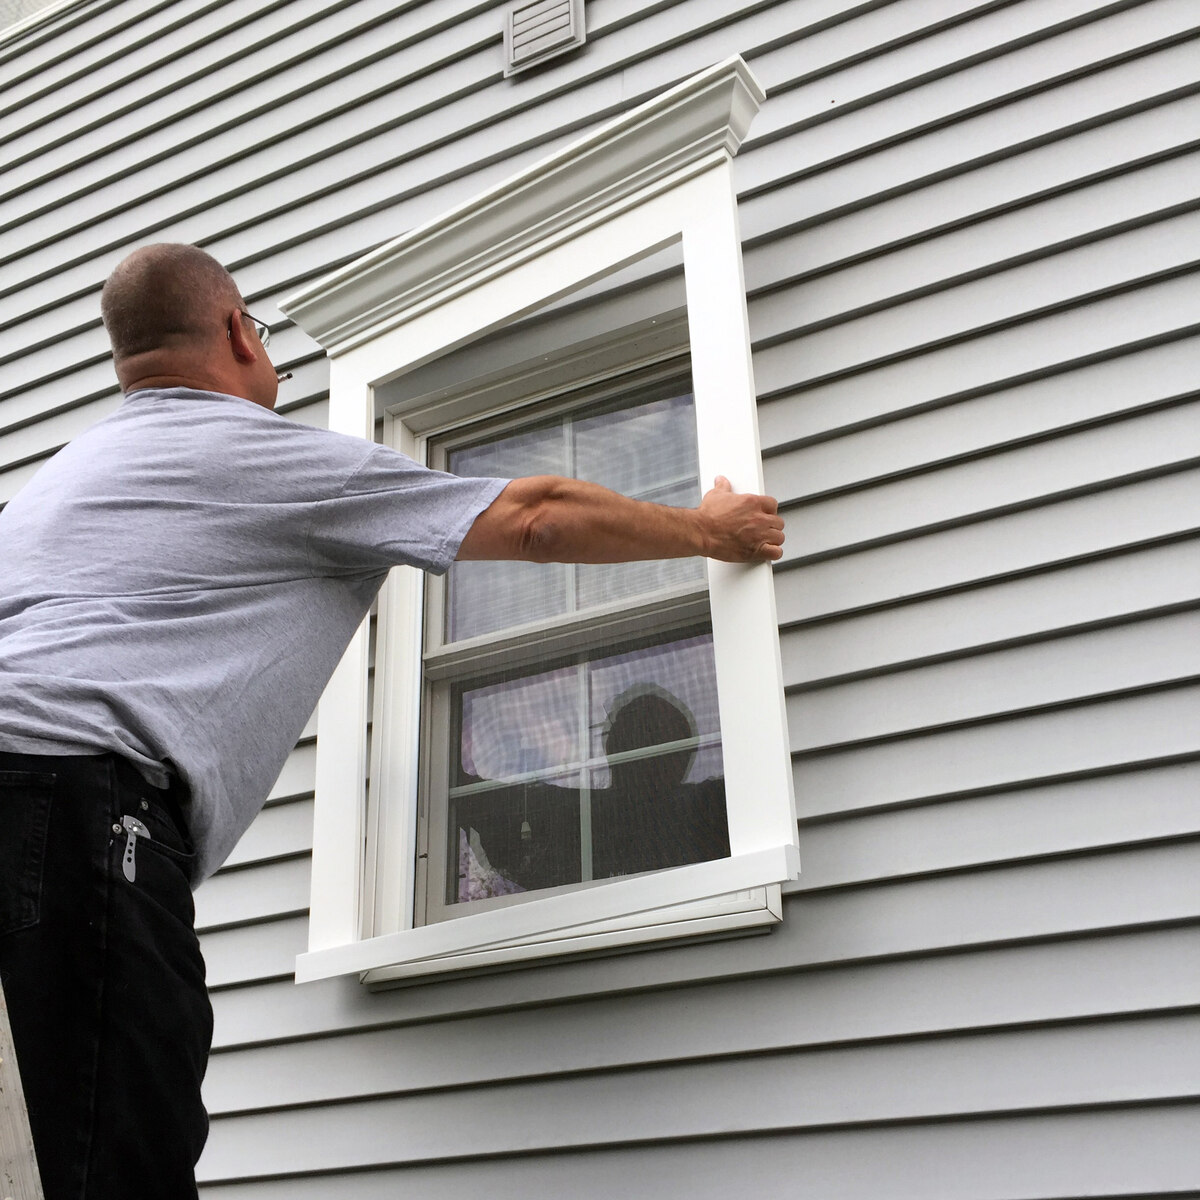 How To Put Shutters On Vinyl Siding